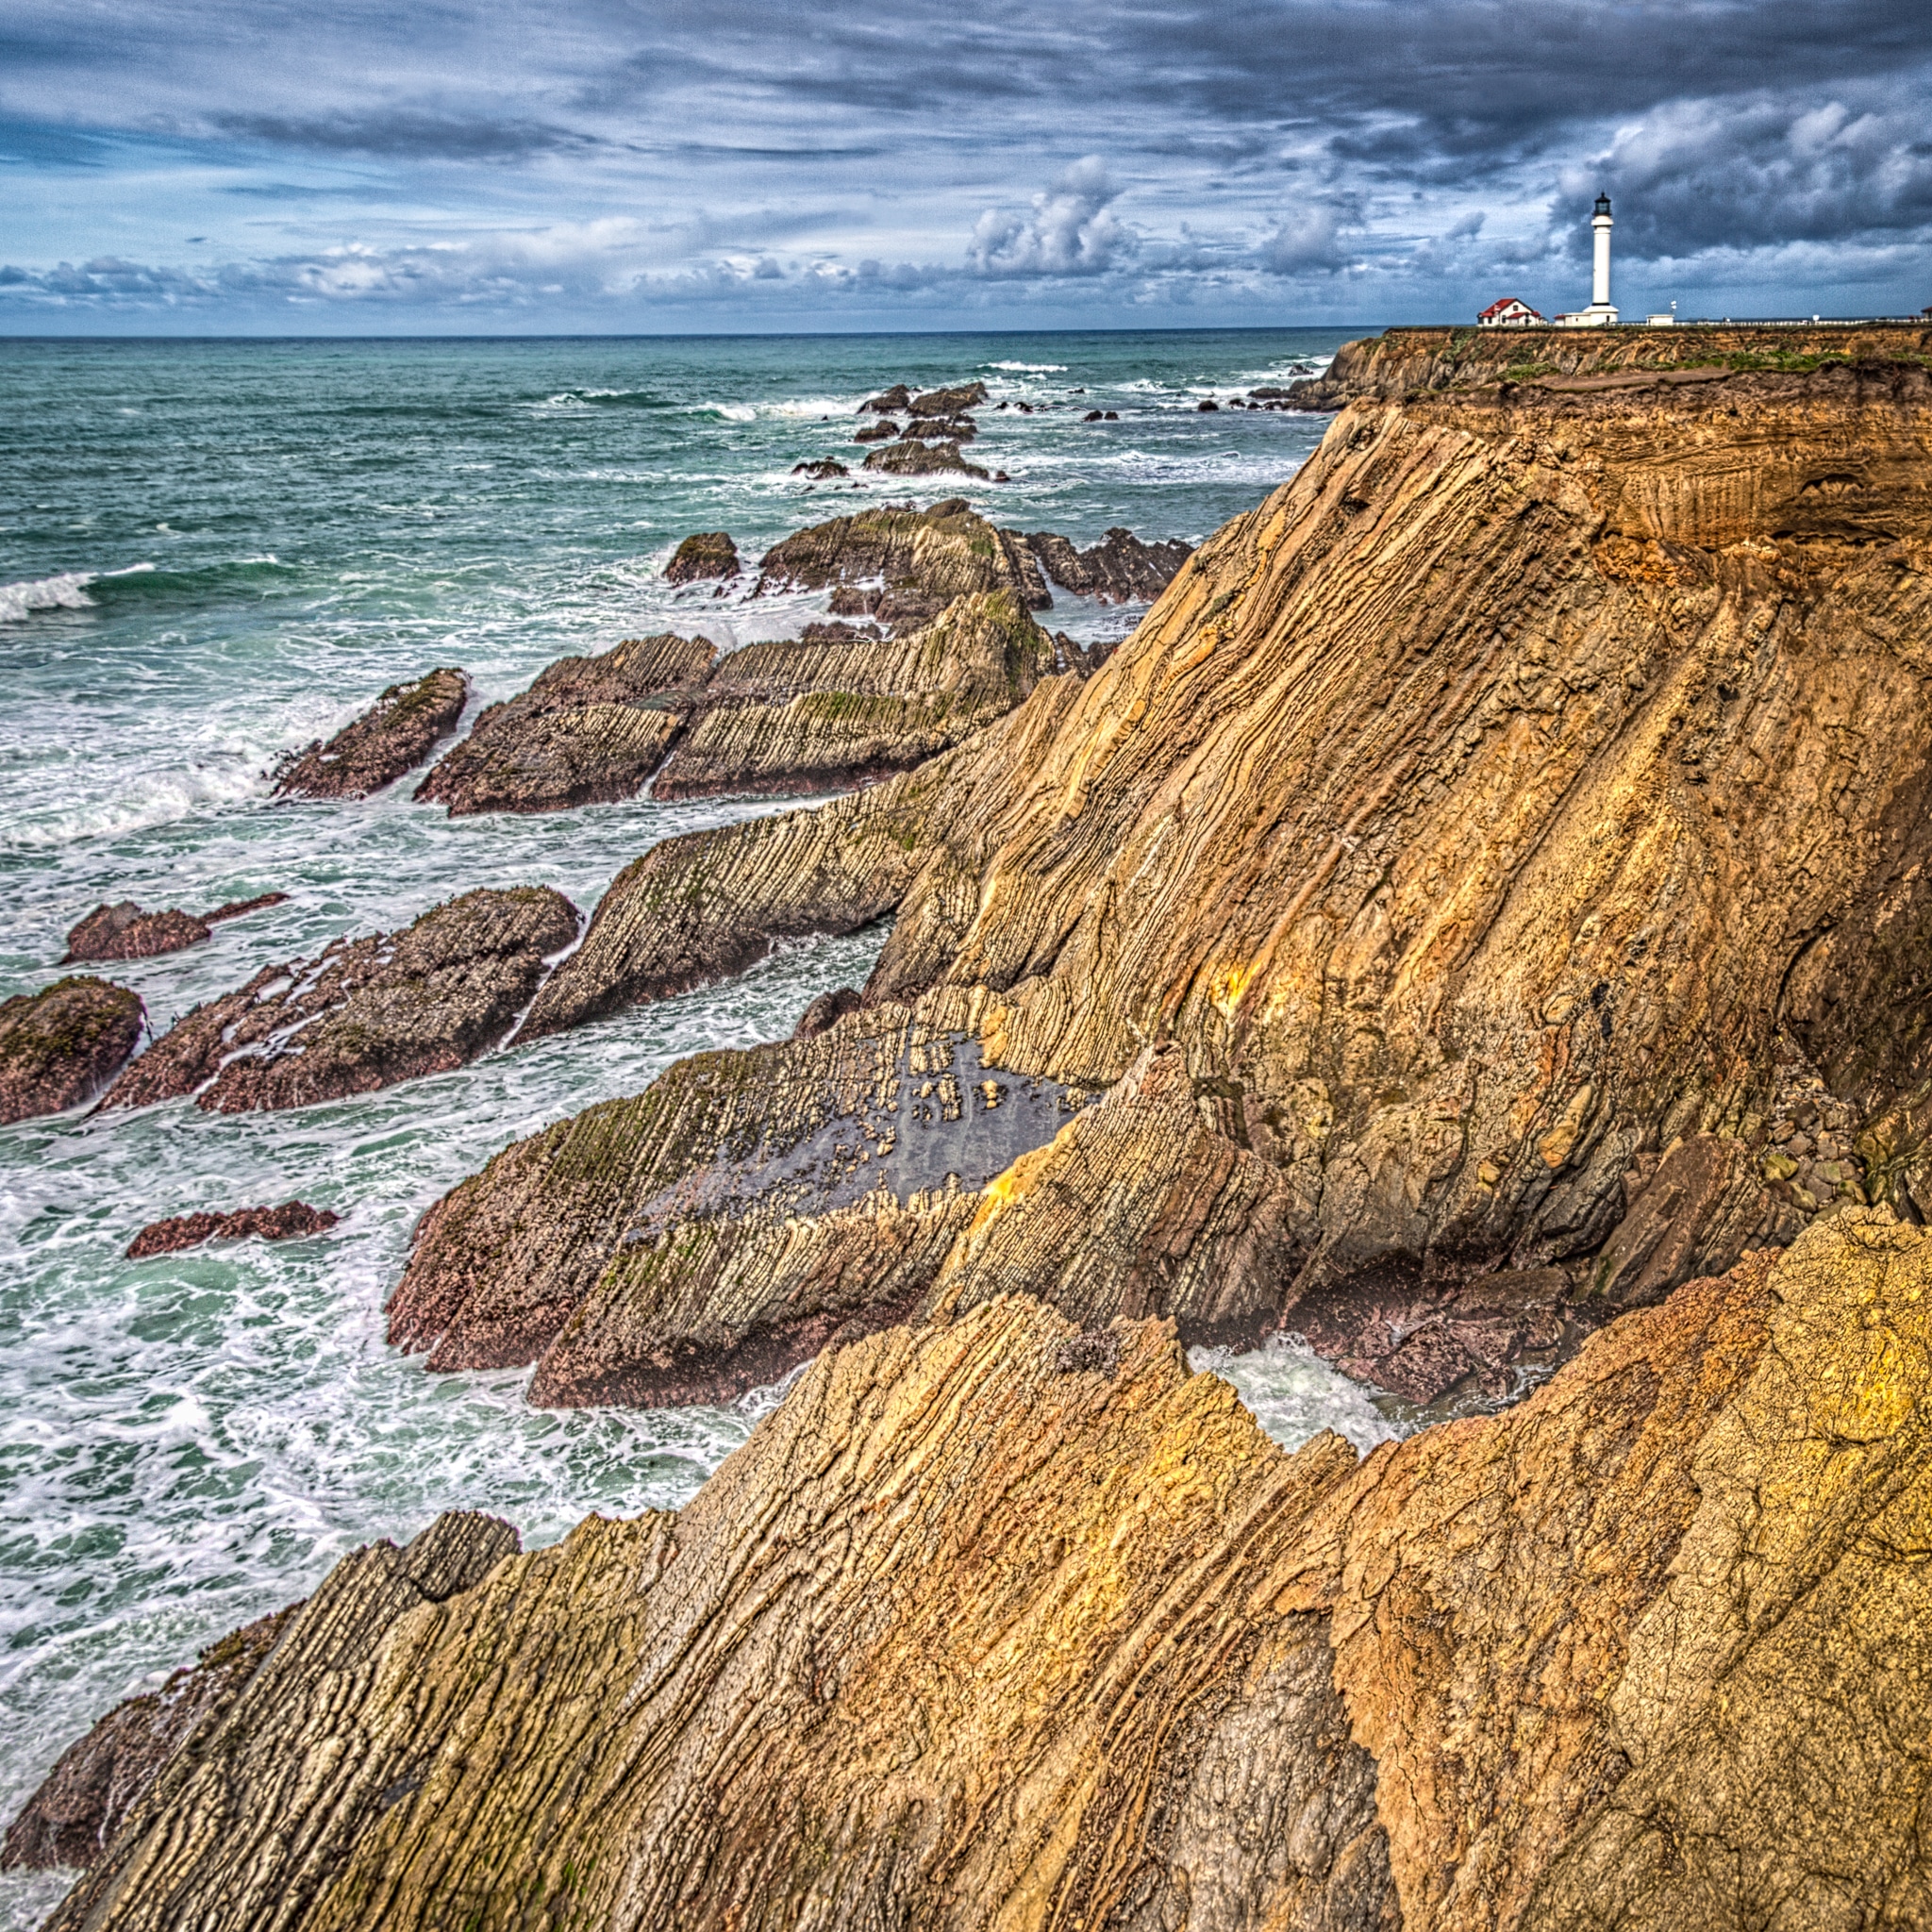 Tar sands occur interbedded with Monterey shale and shaly sandstone to create a dramatic foreground for the Point Arena Lighthouse near the Point Arena-Stornetta Unit, along California's northern coast, south of Mendocino.